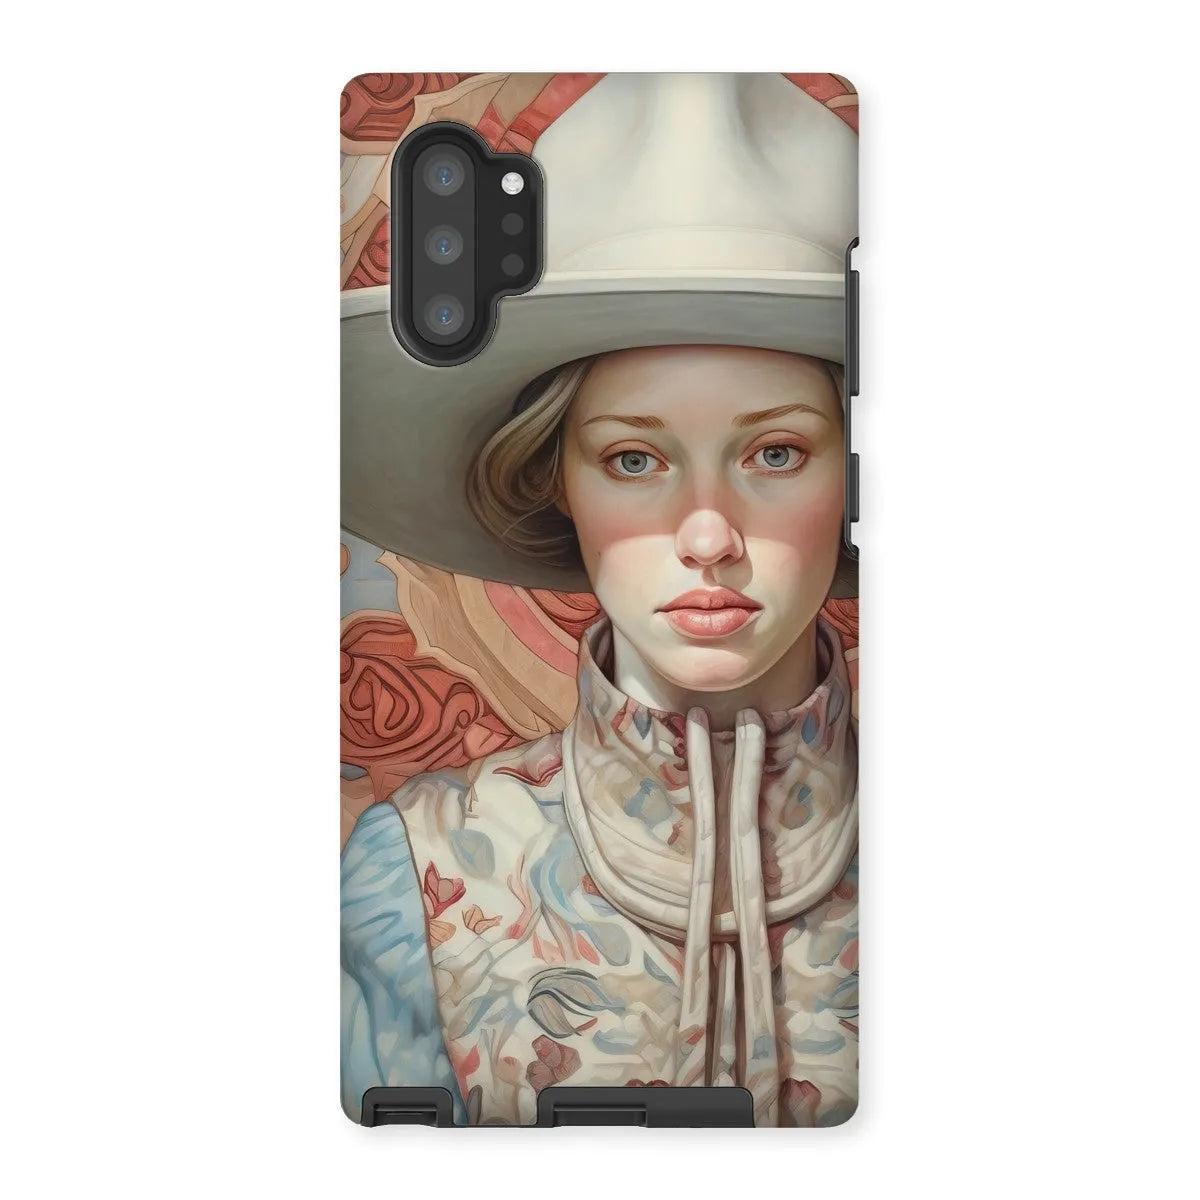 Lottie The Lesbian Cowgirl - Sapphic Art Phone Case - Samsung Galaxy Note 10p / Matte - Mobile Phone Cases - Aesthetic